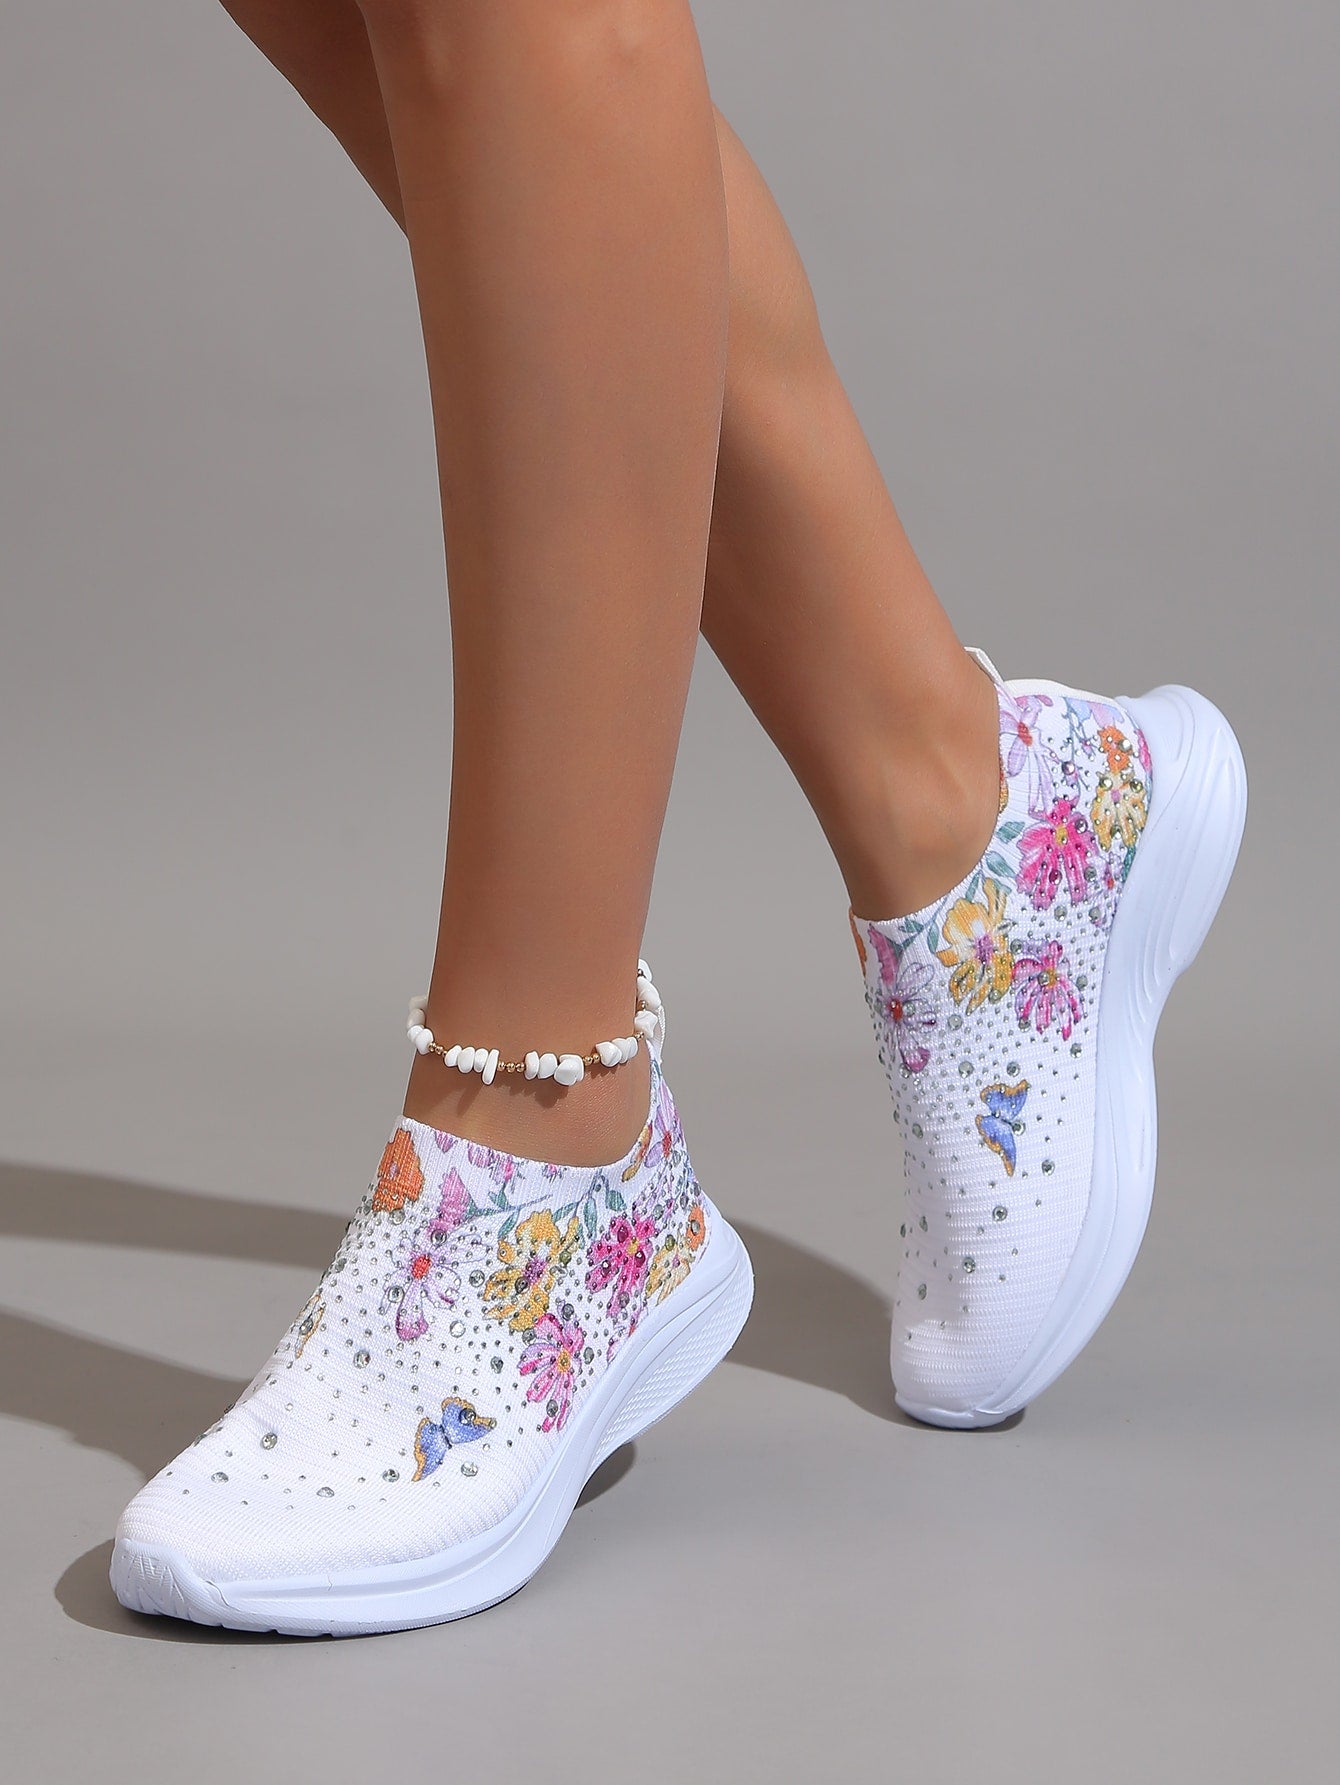 Women Floral Pattern Breathable Running Shoes, Sporty Outdoor Sneakers